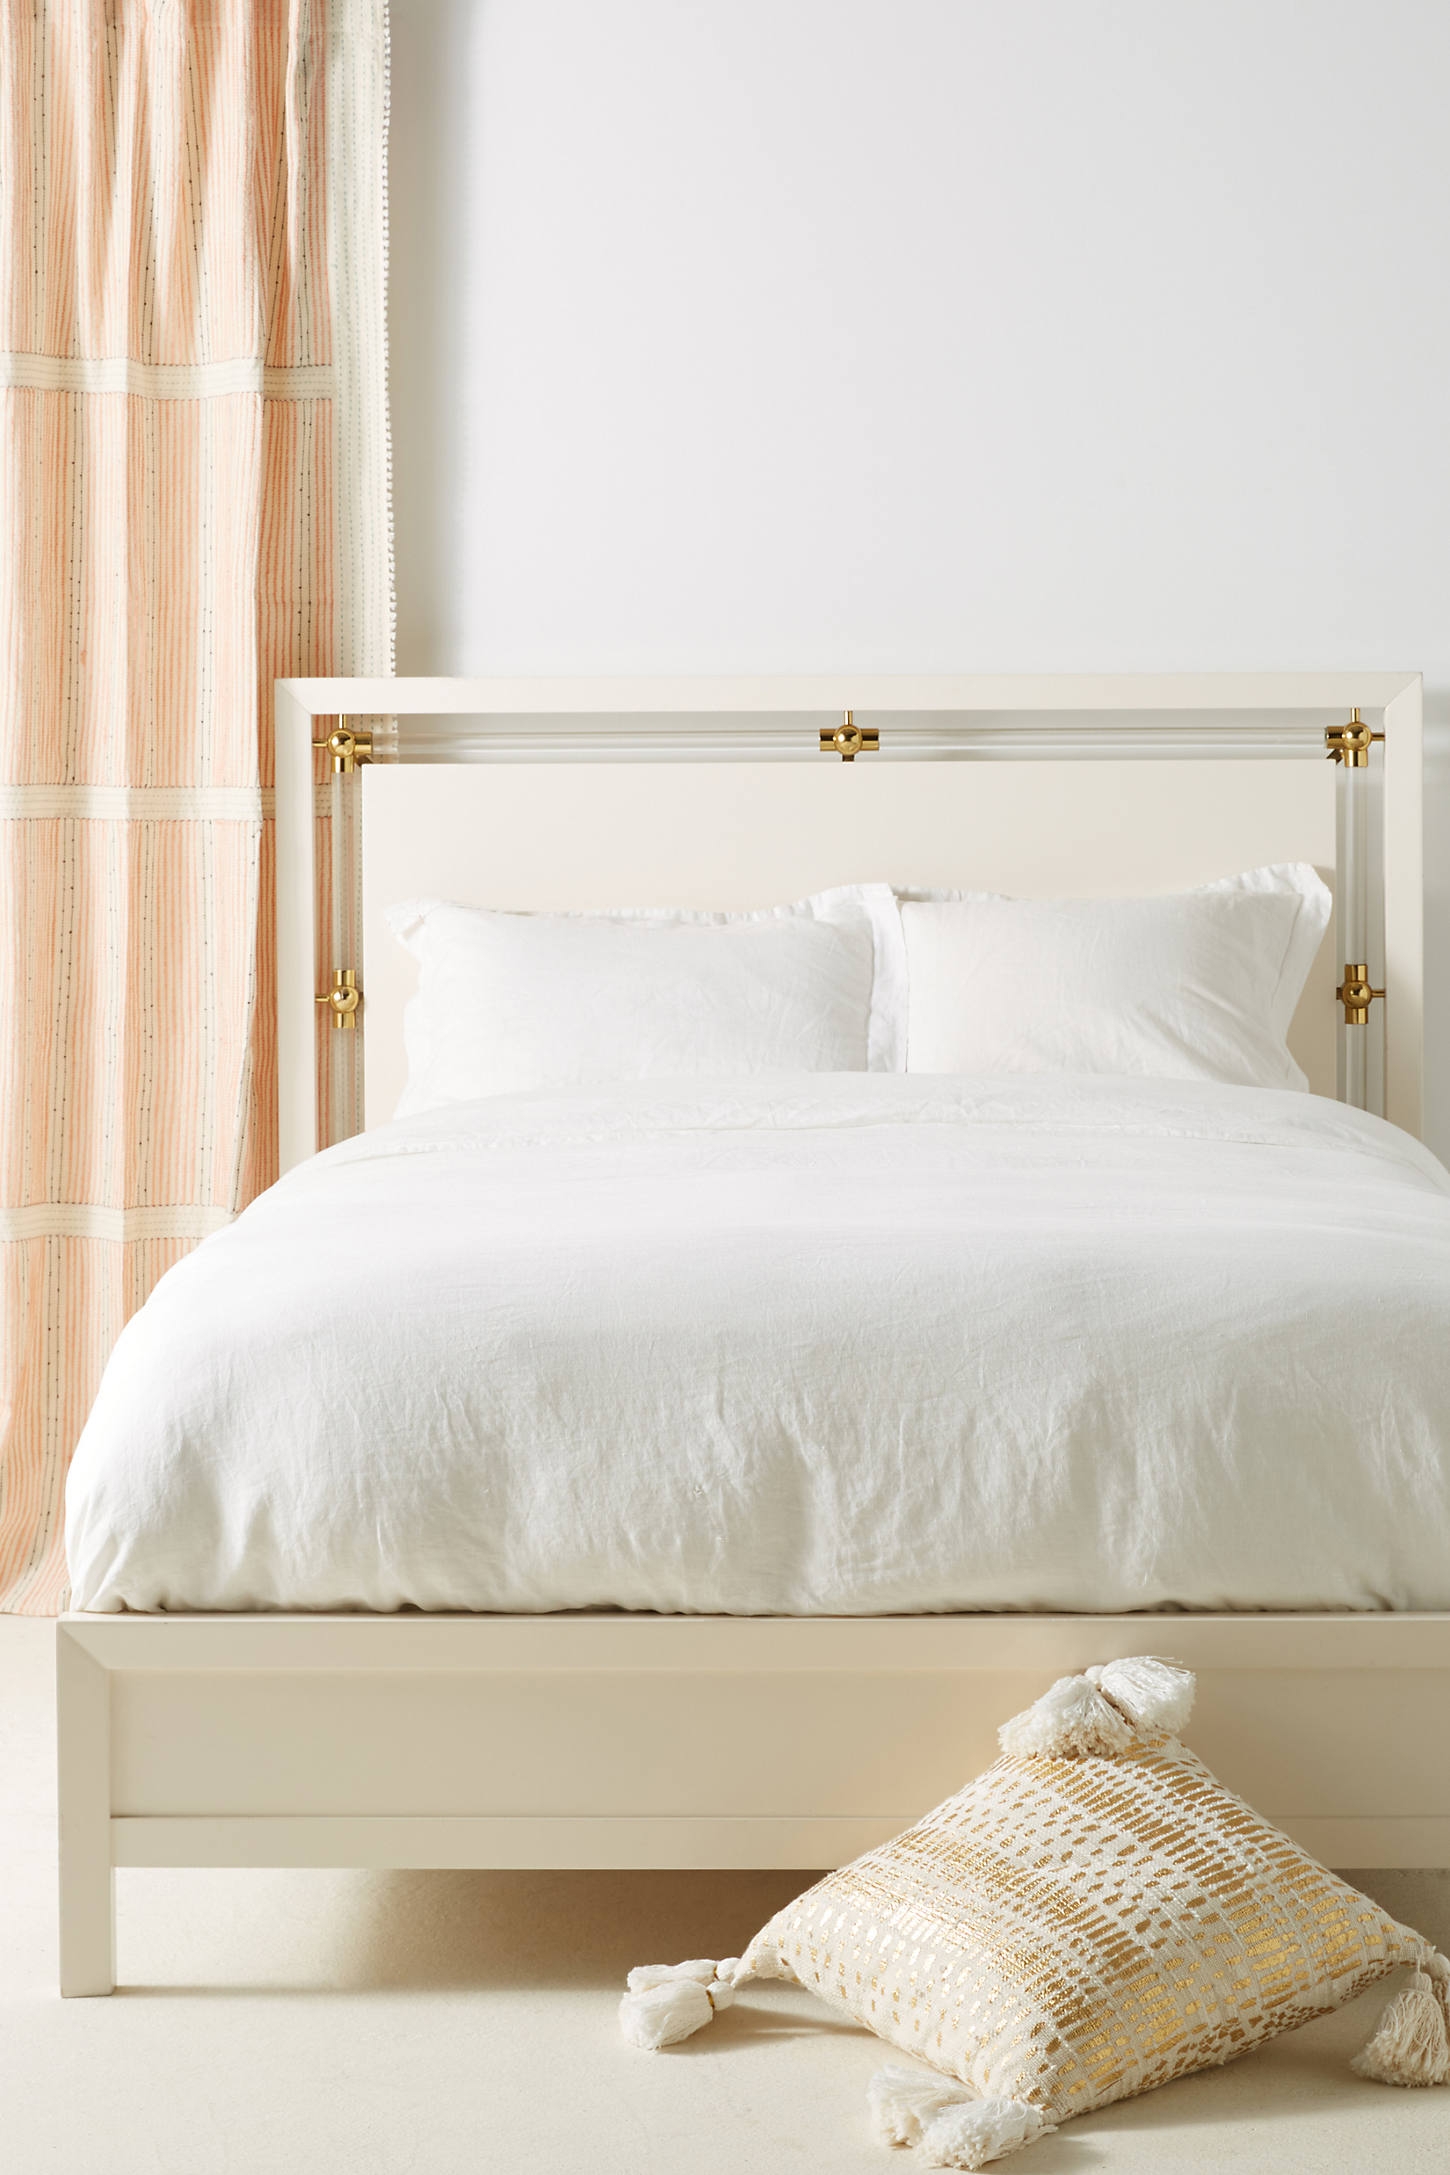 Merriton Bed By Anthropologie in White Size QN TOP/BED - Image 0